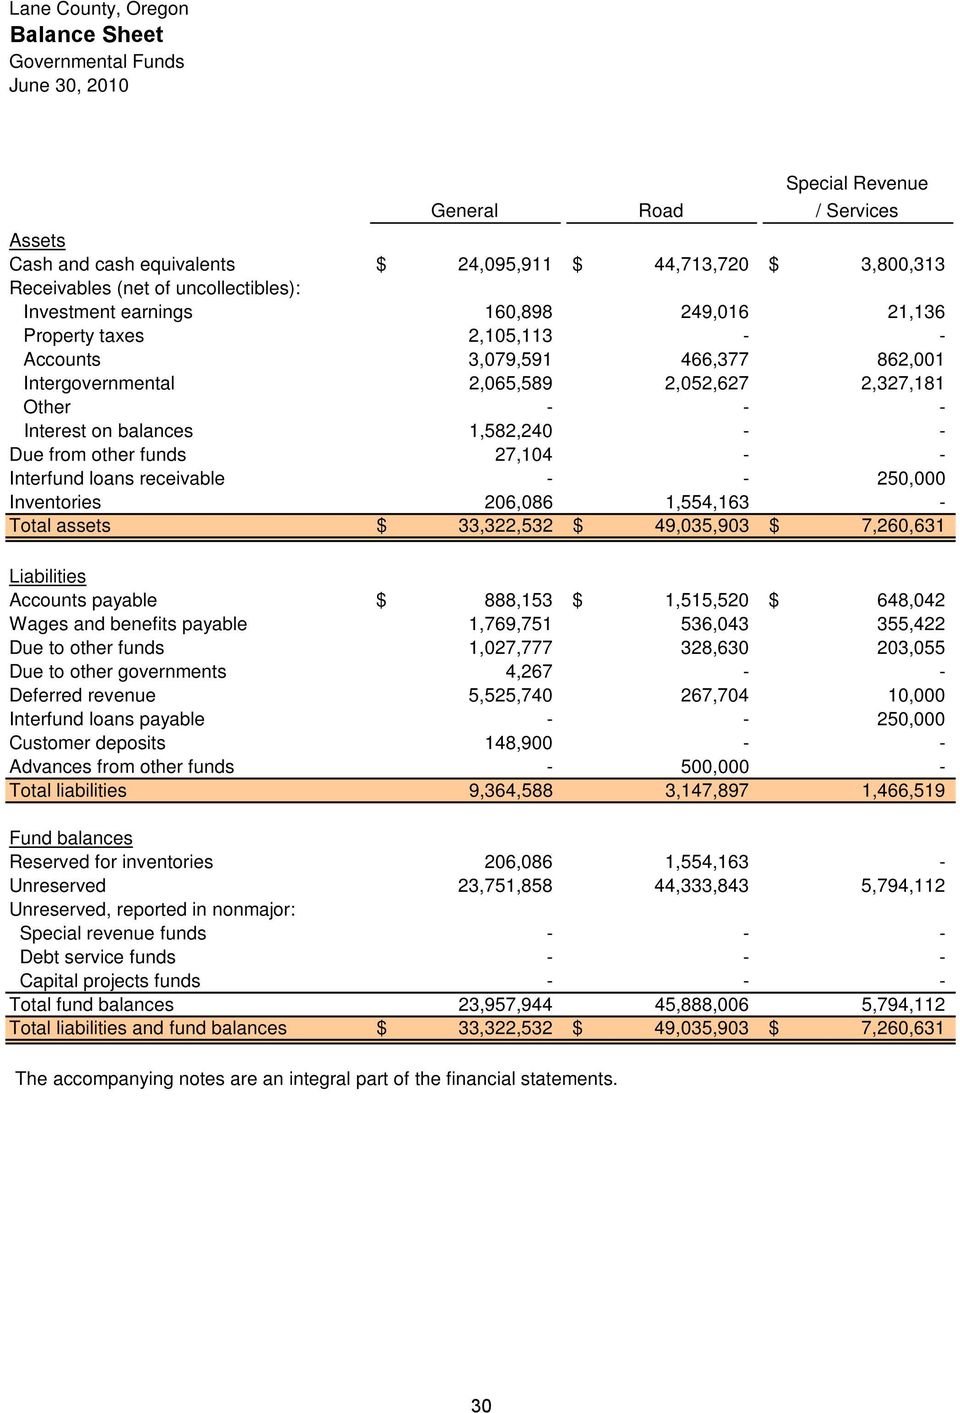 other funds 27,104 - - Interfund loans receivable - - 250,000 Inventories 206,086 1,554,163 - Total assets $ 33,322,532 $ 49,035,903 $ 7,260,631 Liabilities Accounts payable $ 888,153 $ 1,515,520 $